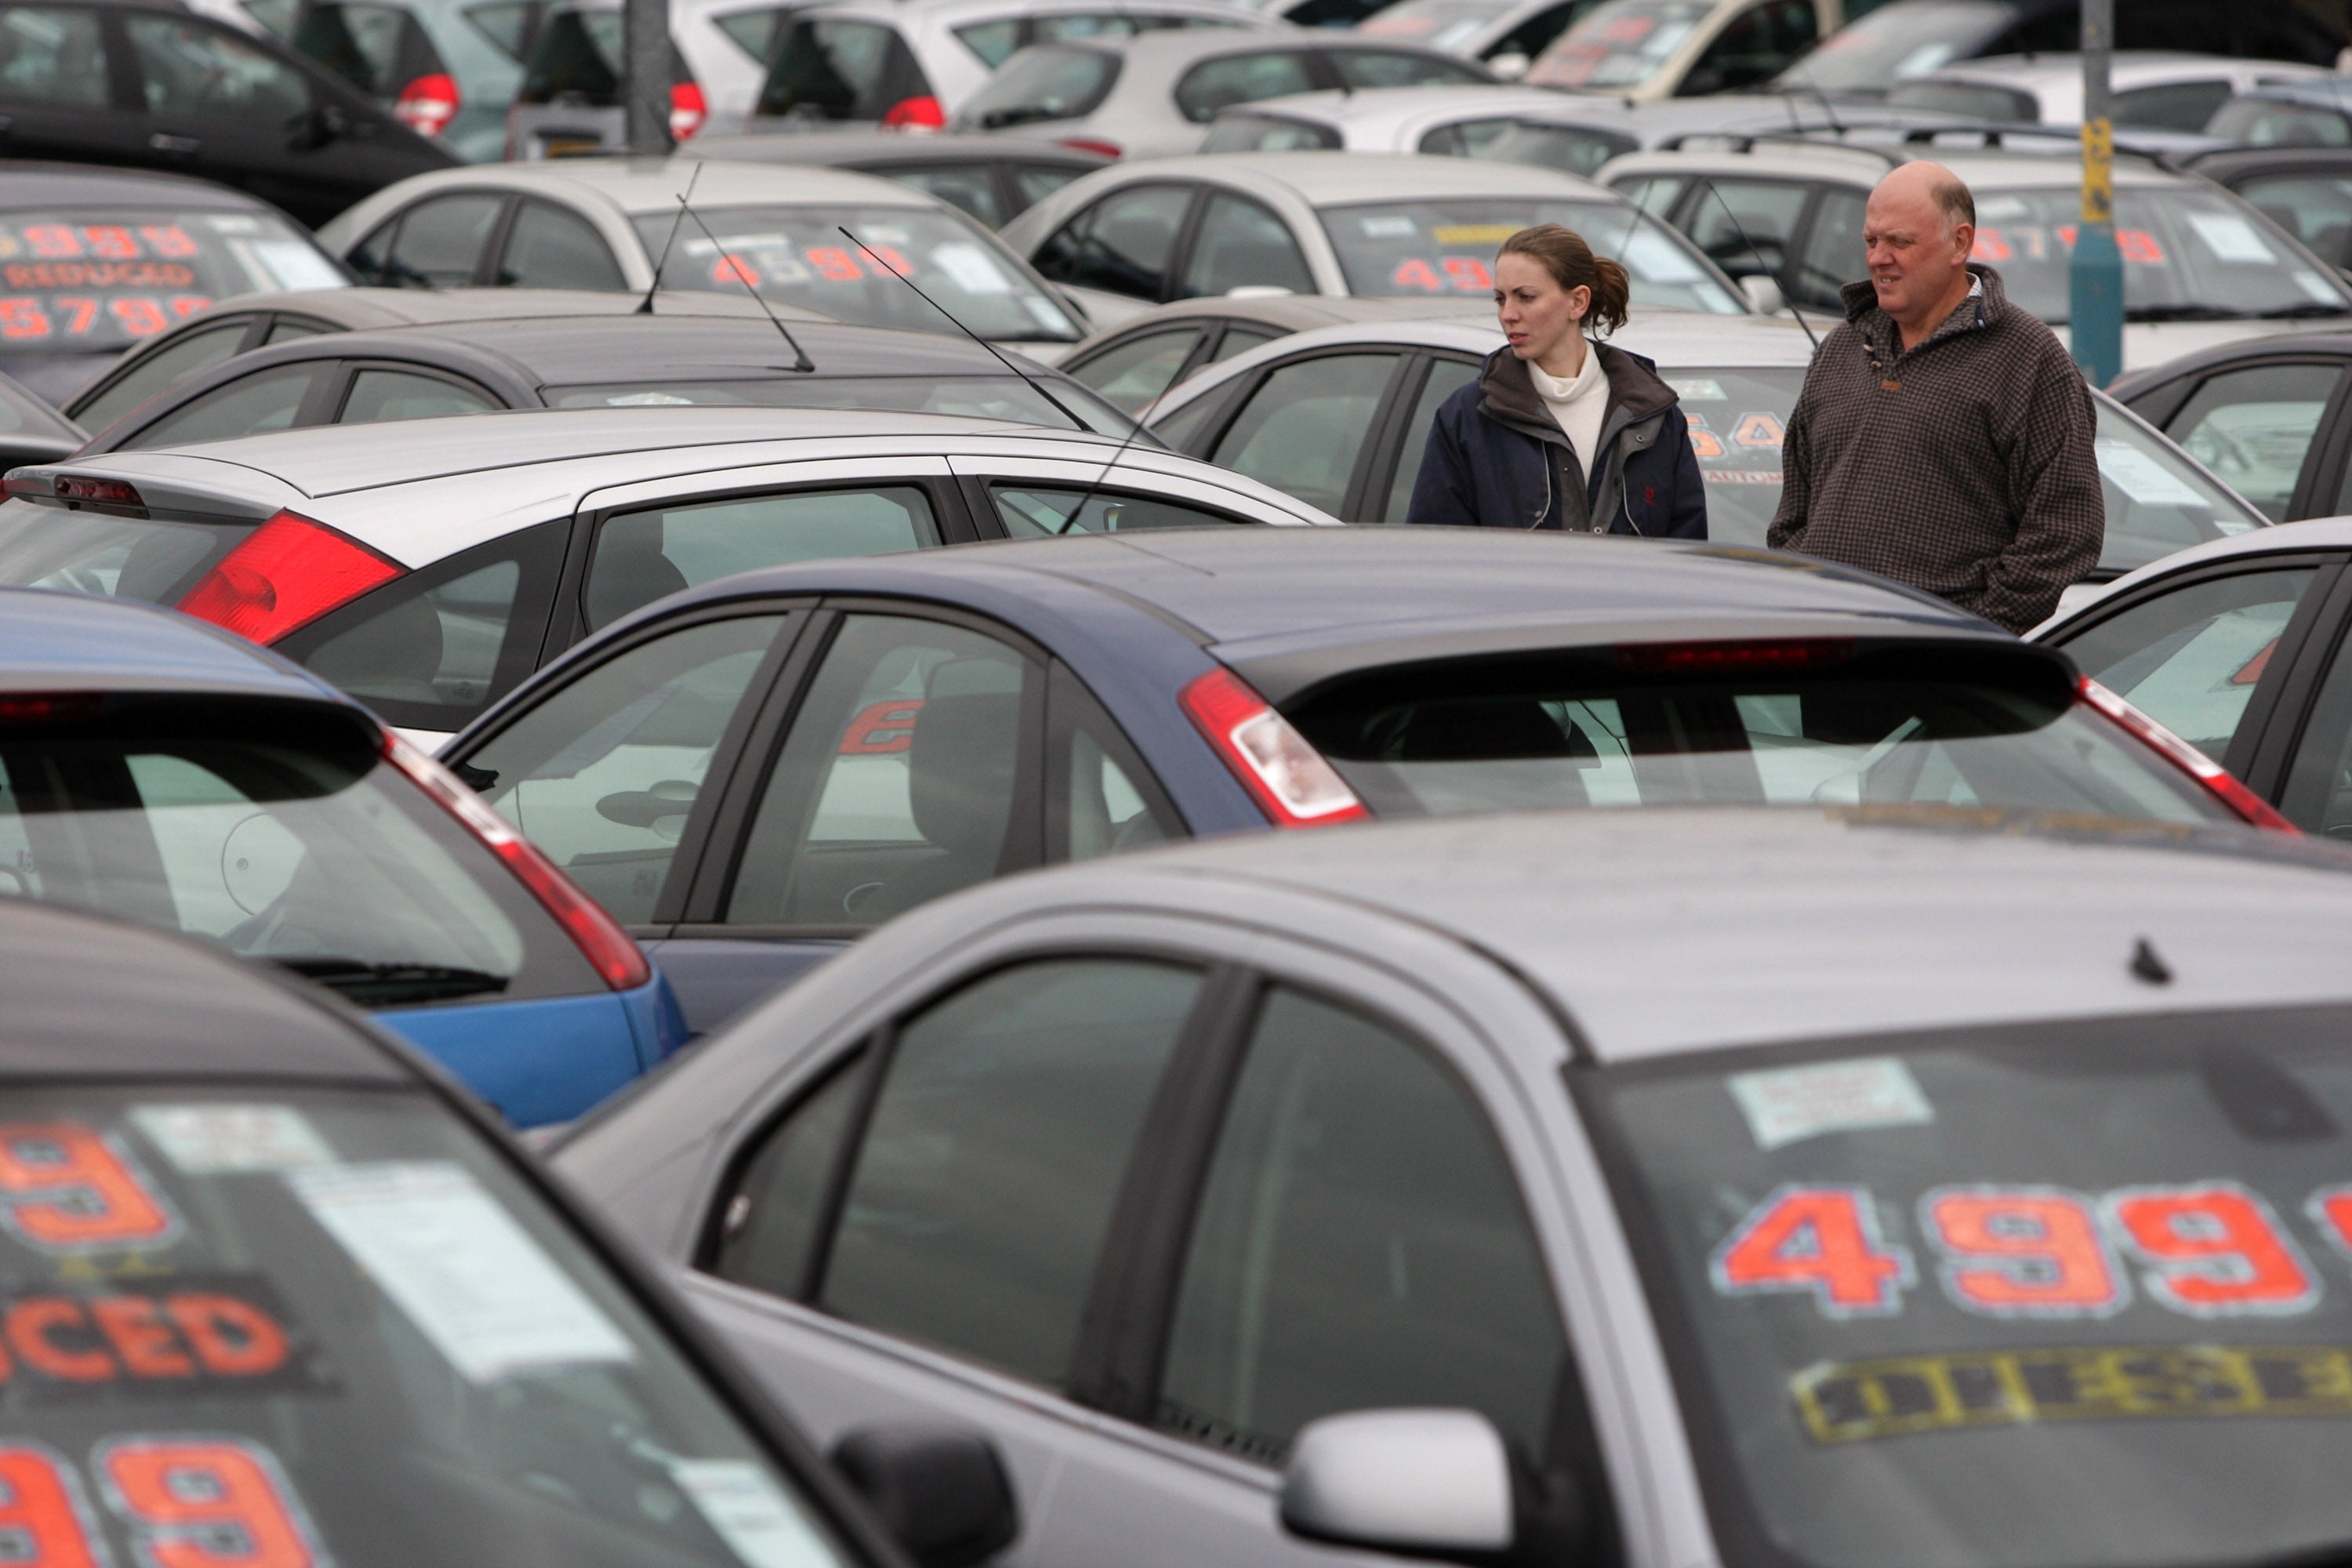 Used cars sales soared during the easing of coronavirus restrictions and new car stock shortages, figures show